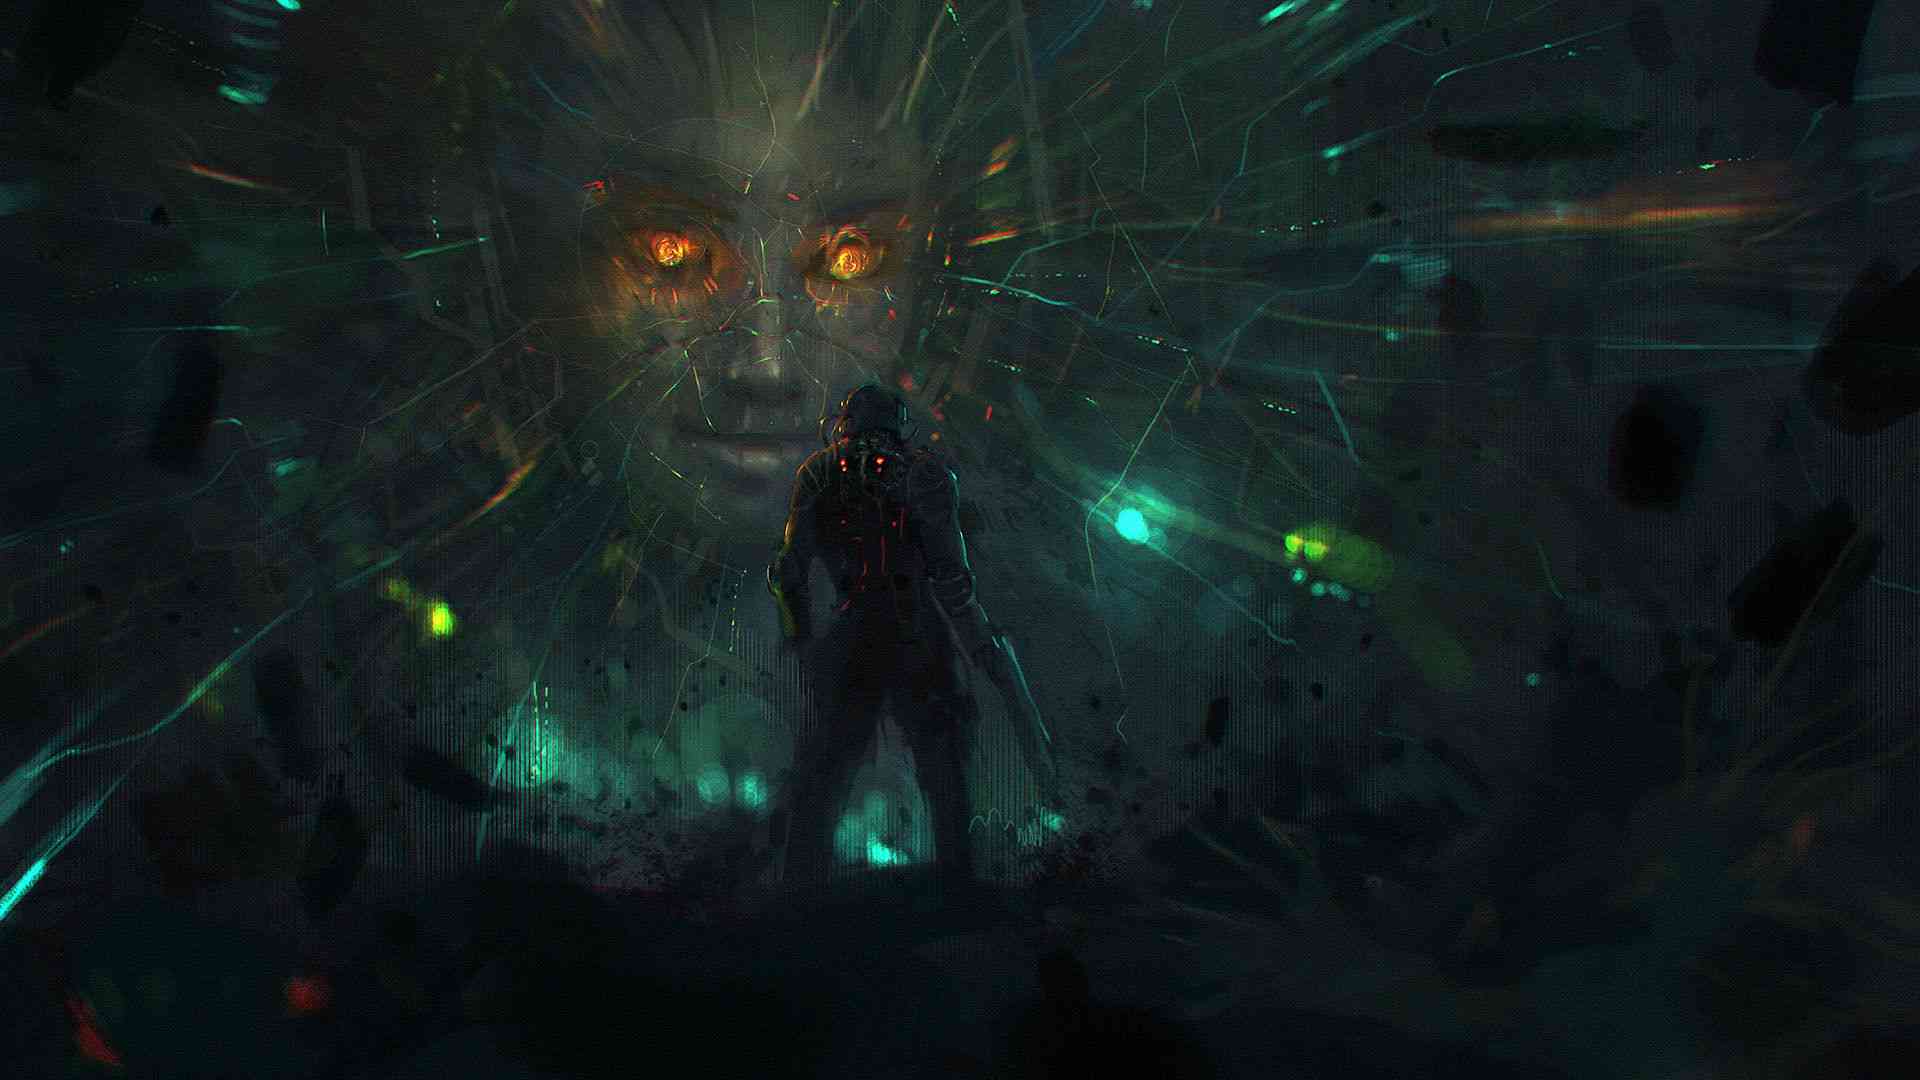 system shock 3s first screenshots and teaser trailer has released 1948 big 1